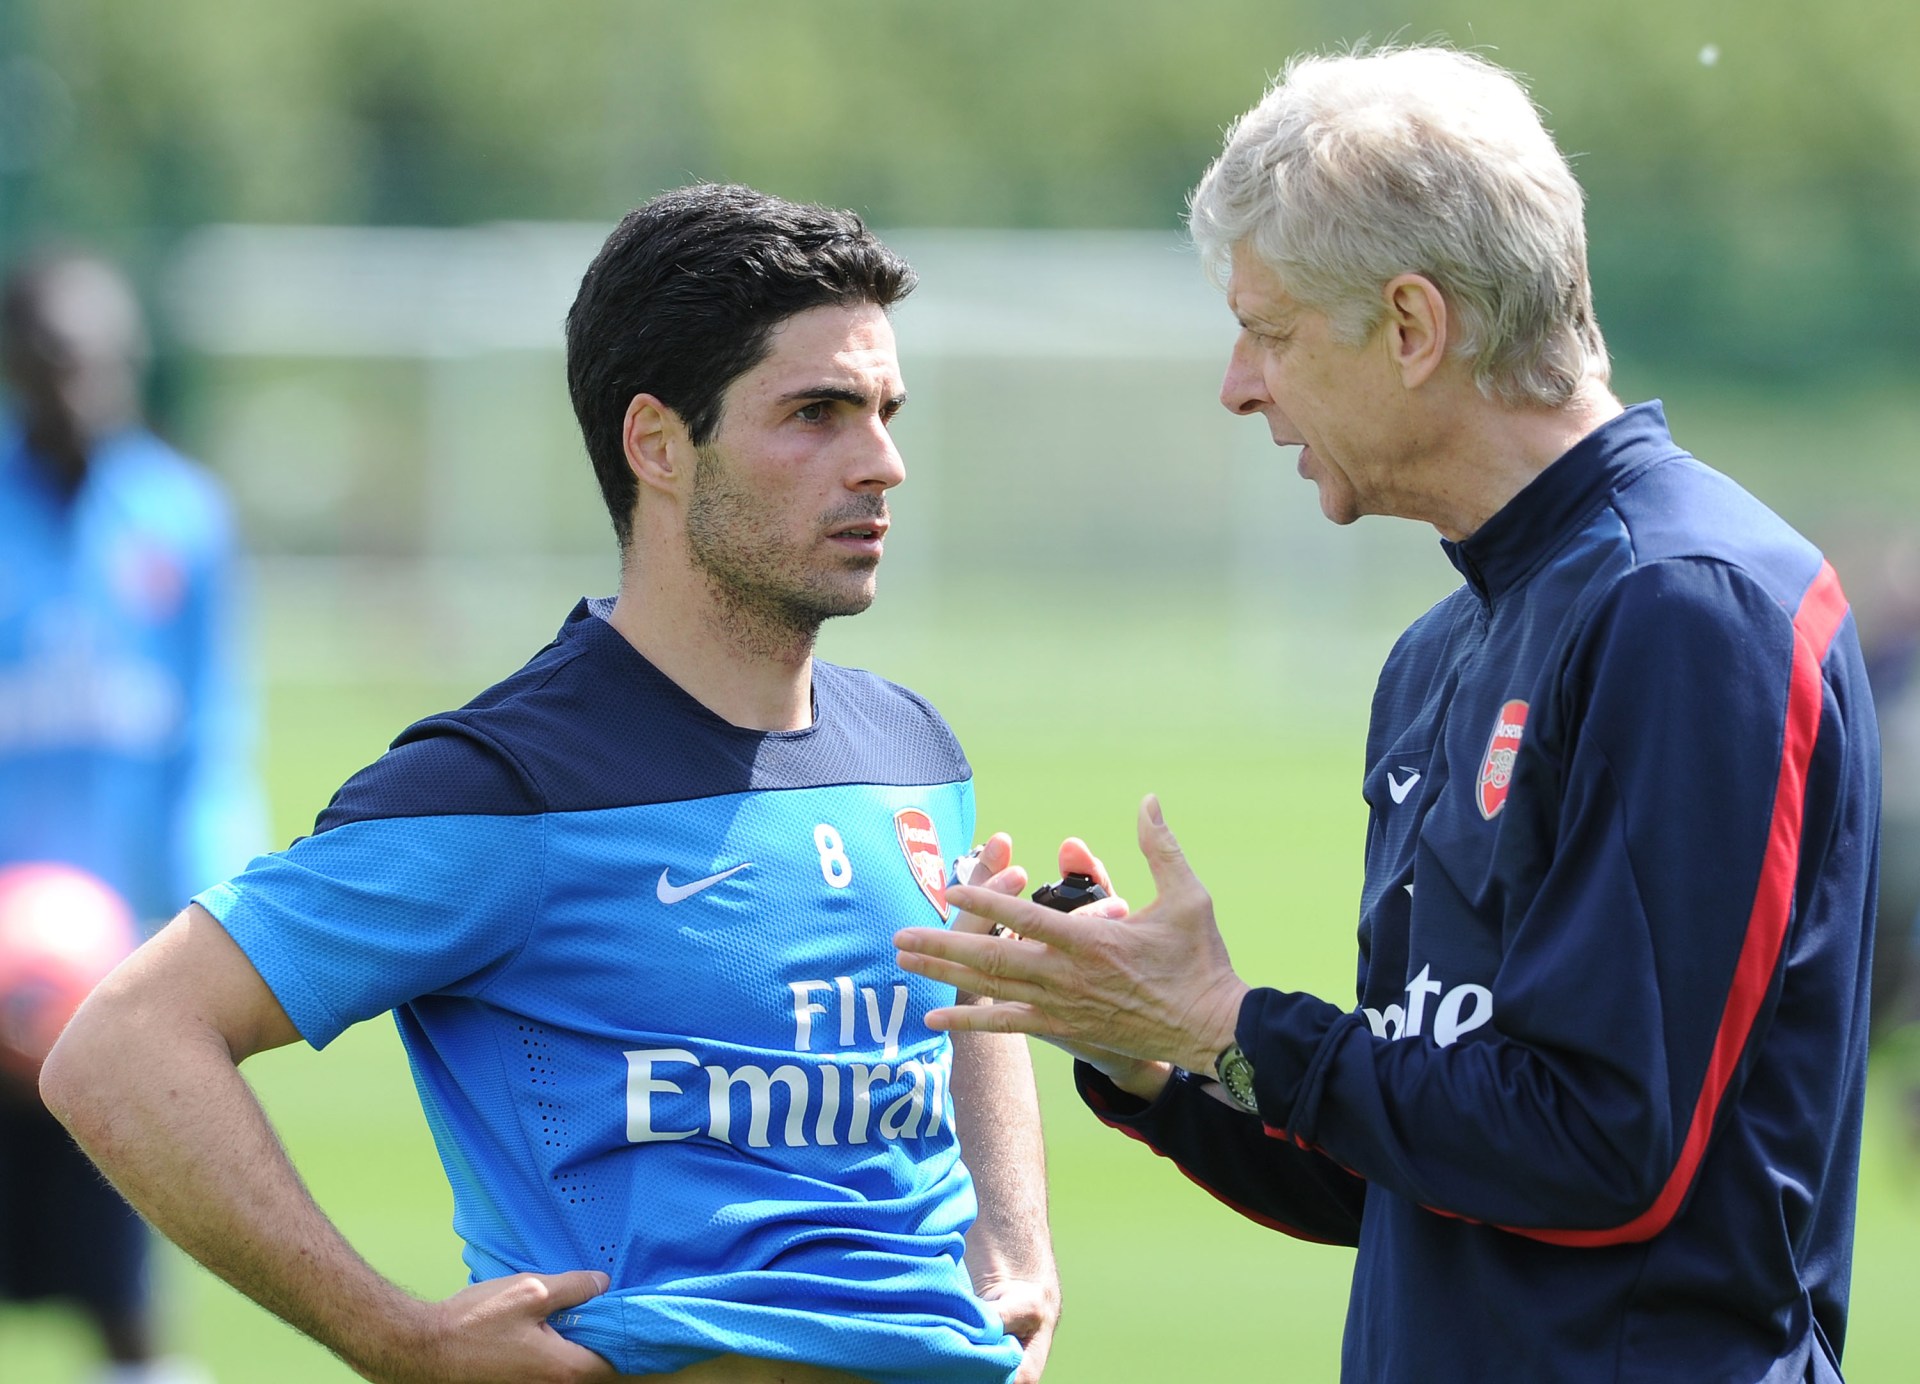 mikel arteta reveals chat with arsene wenger ahead of arsenal's title run-in